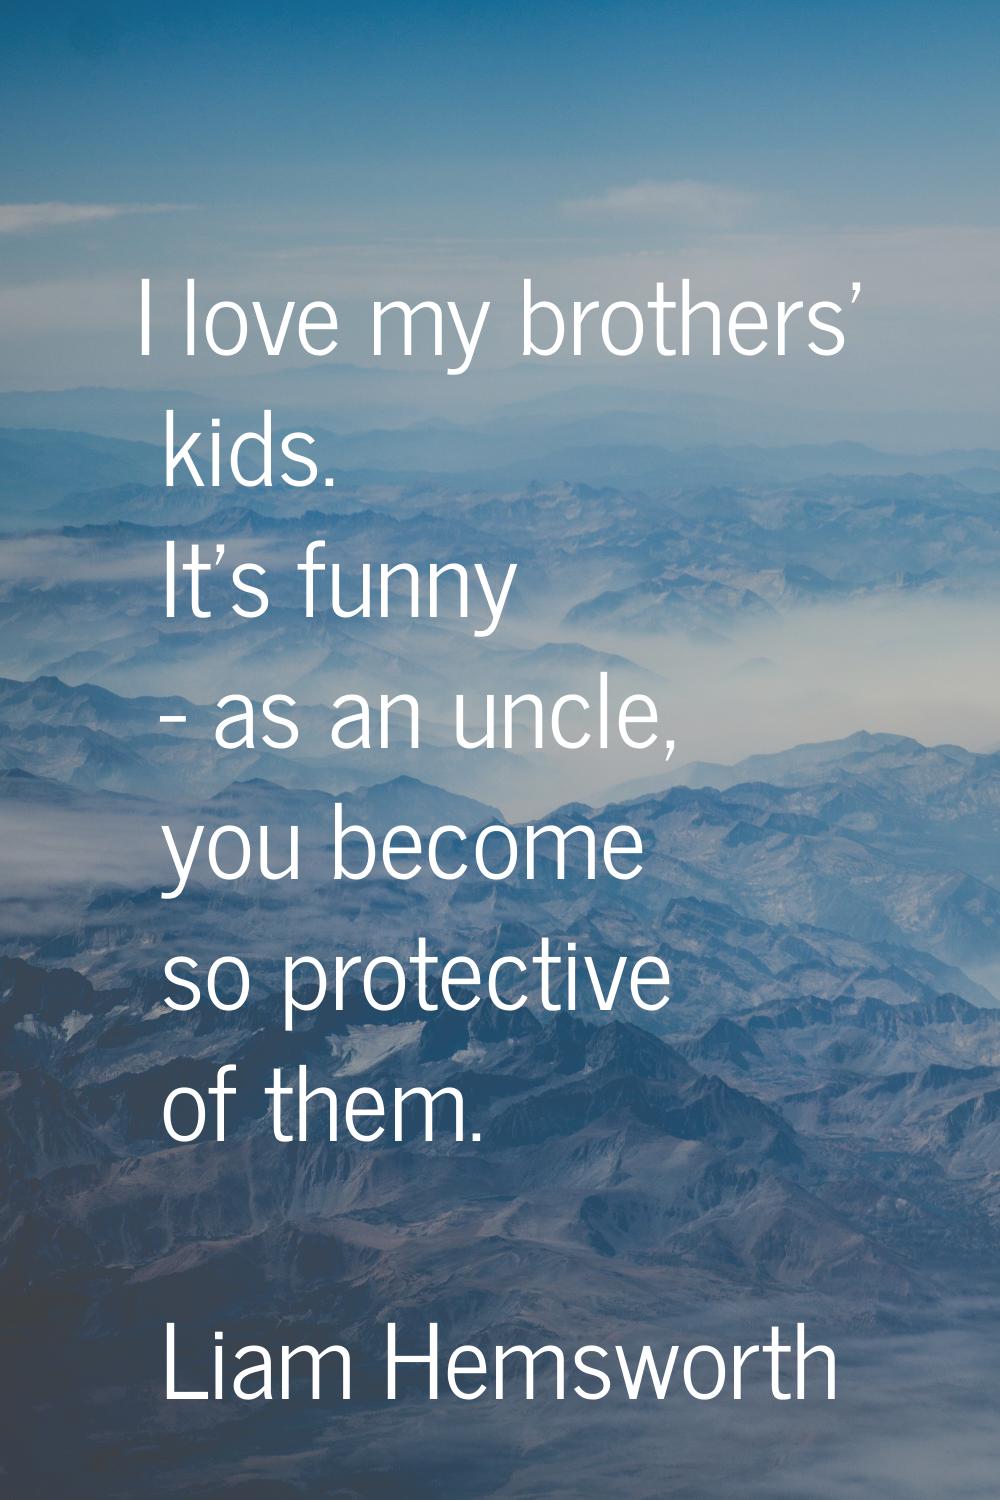 I love my brothers' kids. It's funny - as an uncle, you become so protective of them.